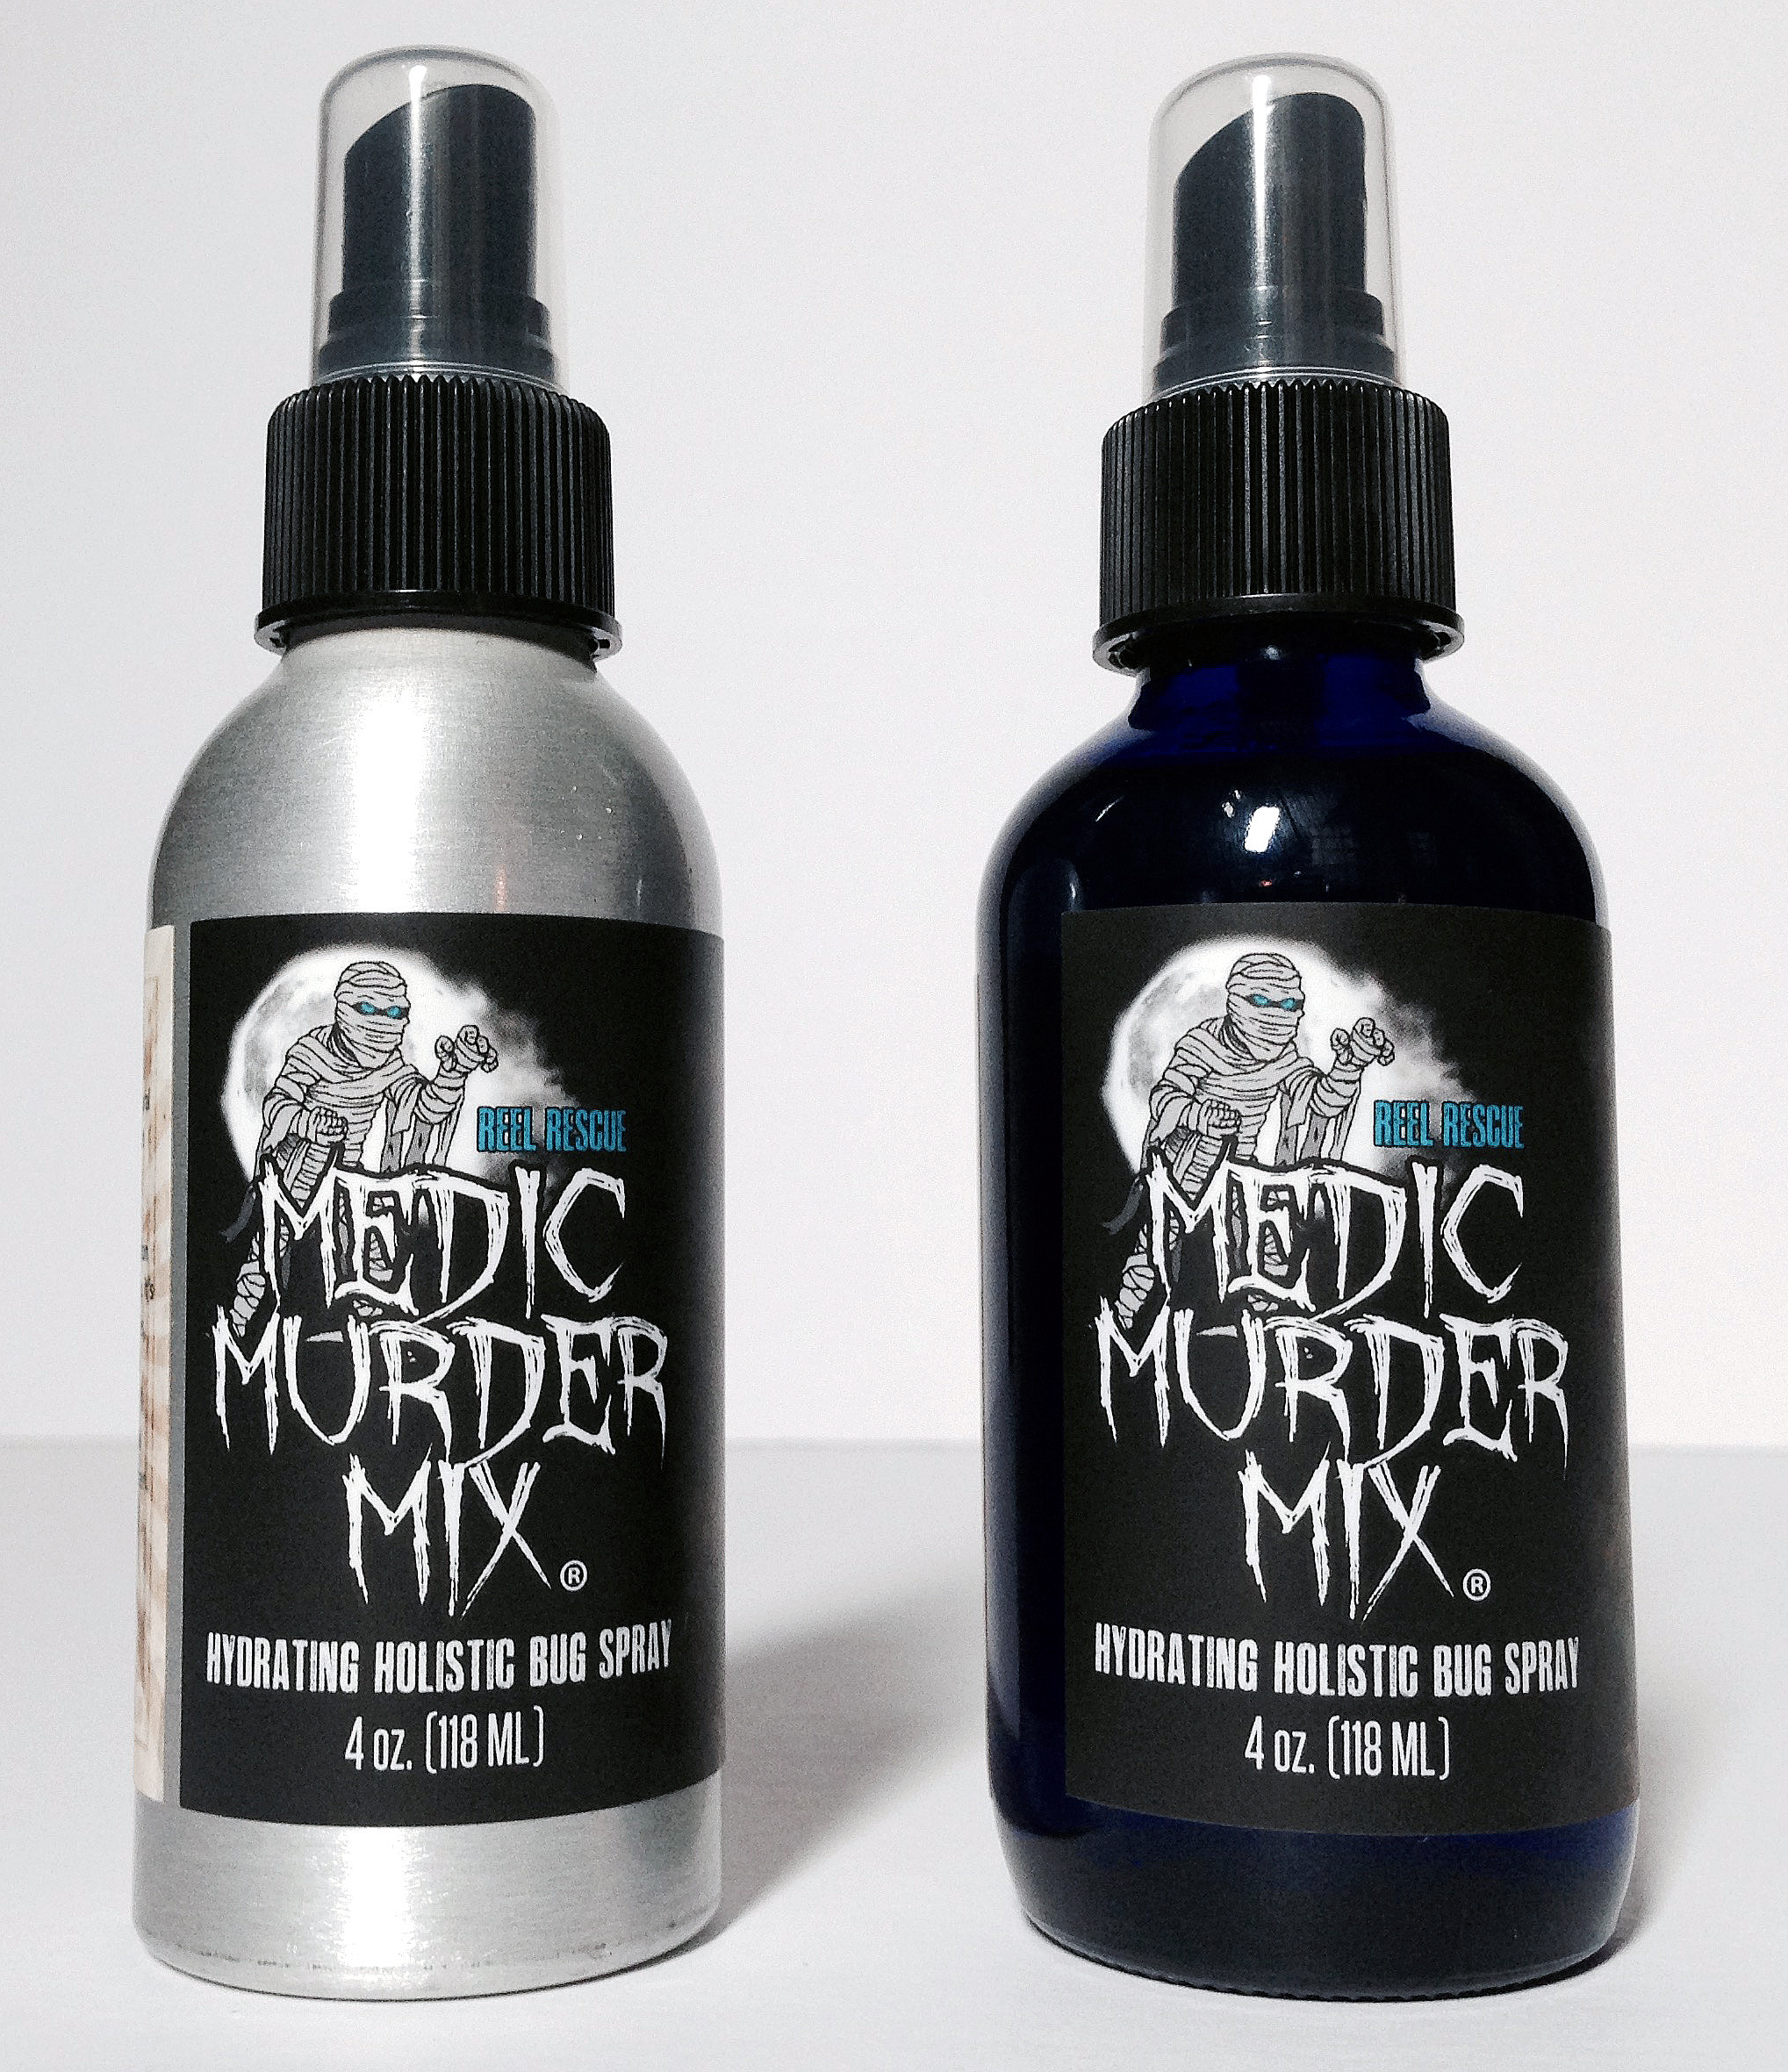 Medic Murder Mix now comes in two different 4 oz. size bottles to fit your needs. Cobalt blue glass and brushed aluminum. For questions and ordering contact Kris at www.medicmurdermix.com See resume for additional contact and product description.